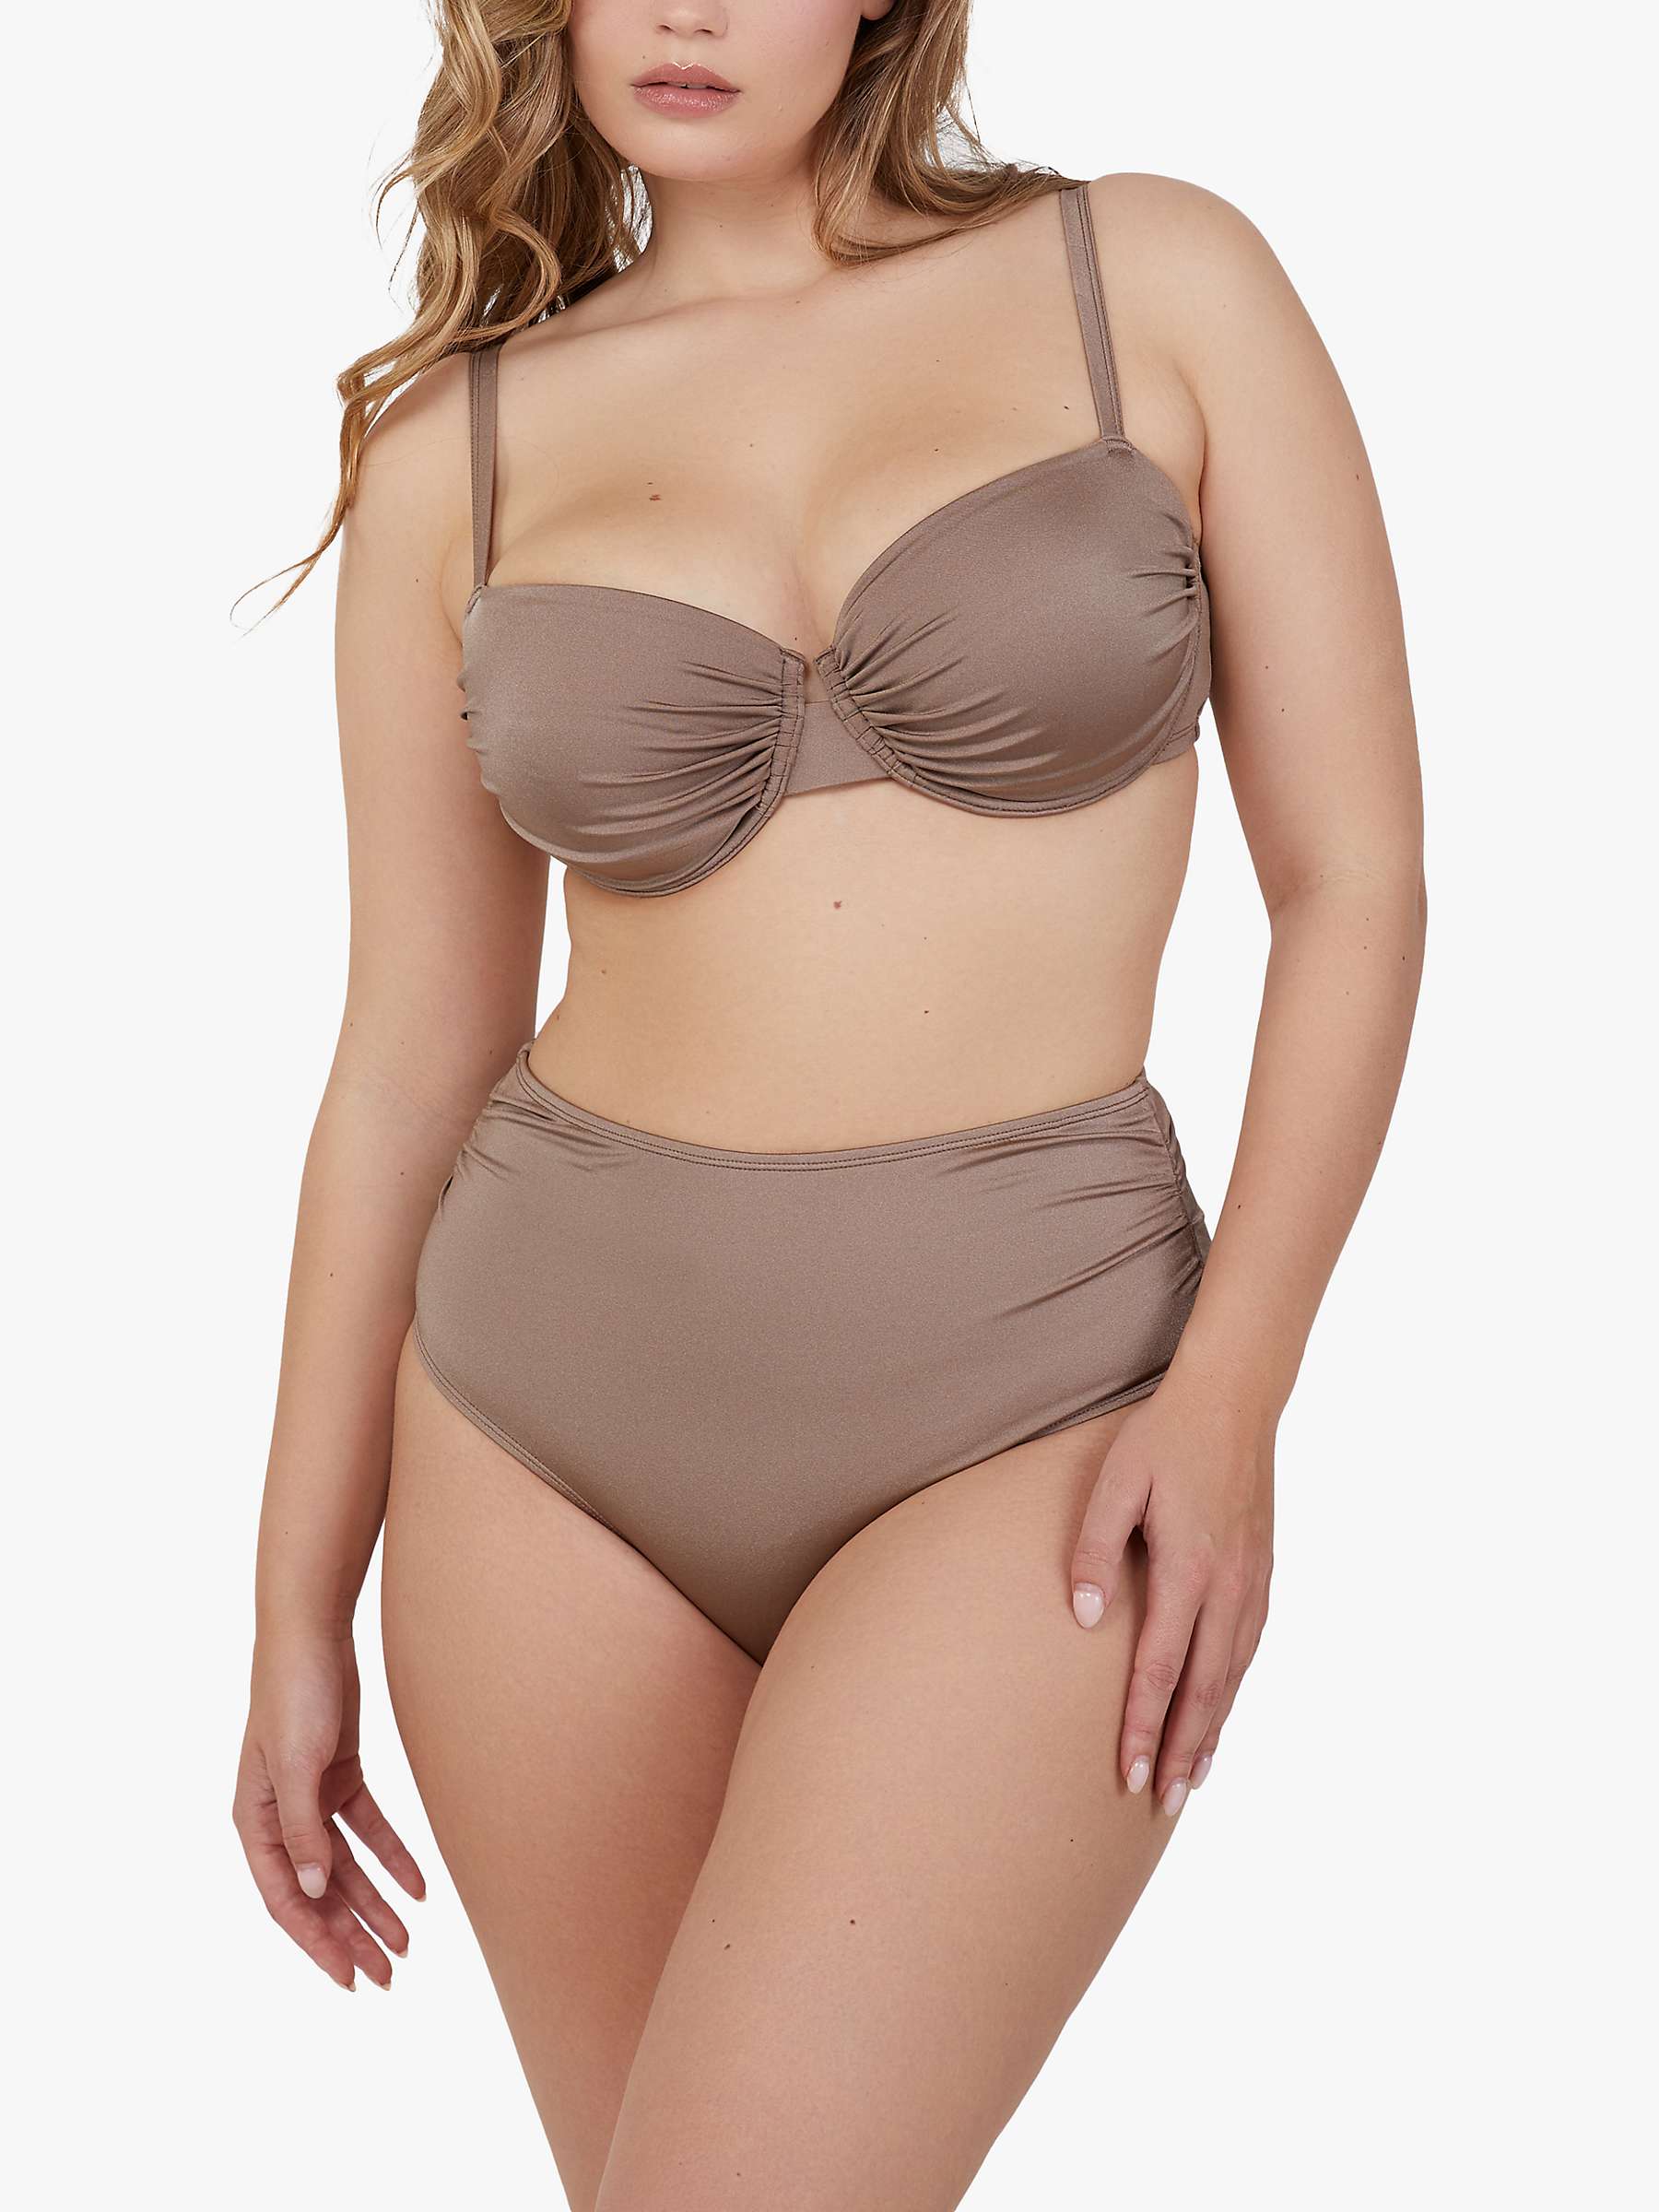 Buy Wolf & Whistle Jade High Waist High Leg Ruched Bikini Bottoms, Taupe Online at johnlewis.com